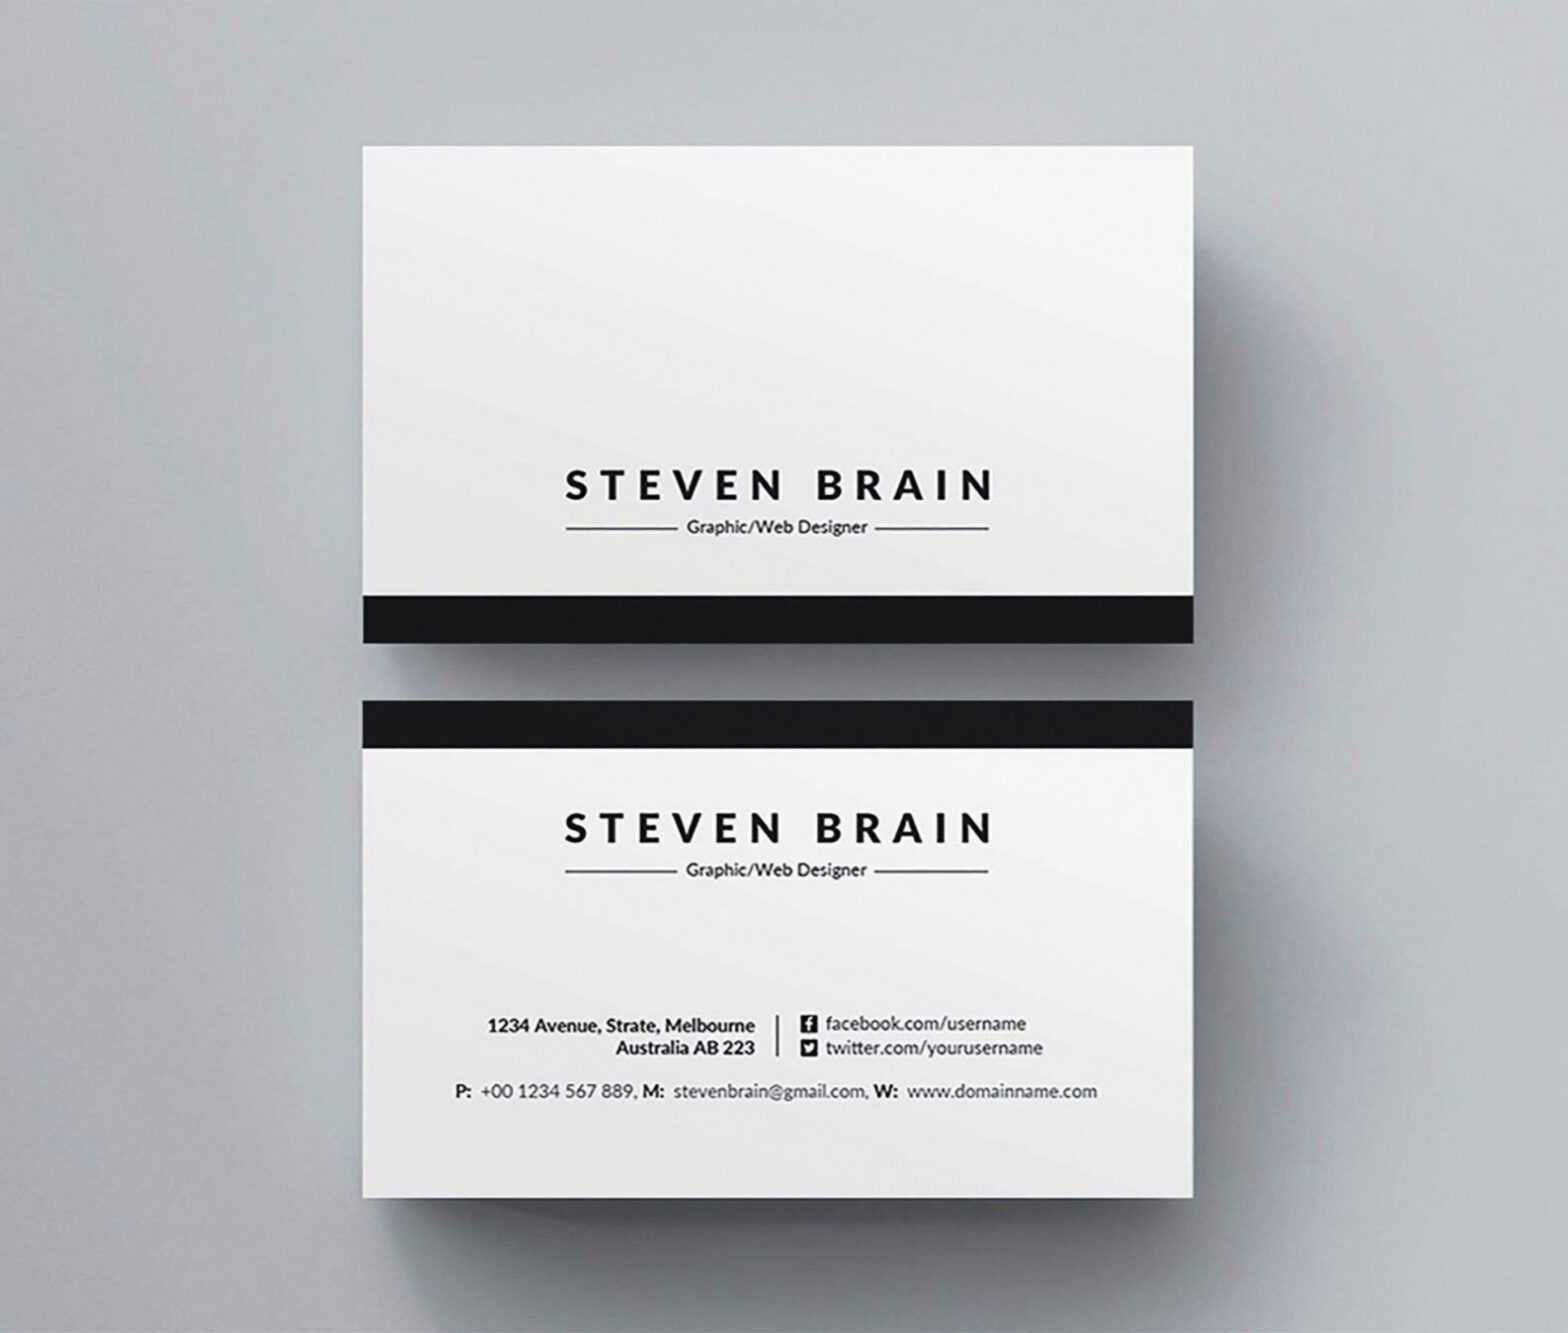 Free Blank Business Card Template For Word 2007 ~ Addictionary throughout Business Card Template For Word 2007